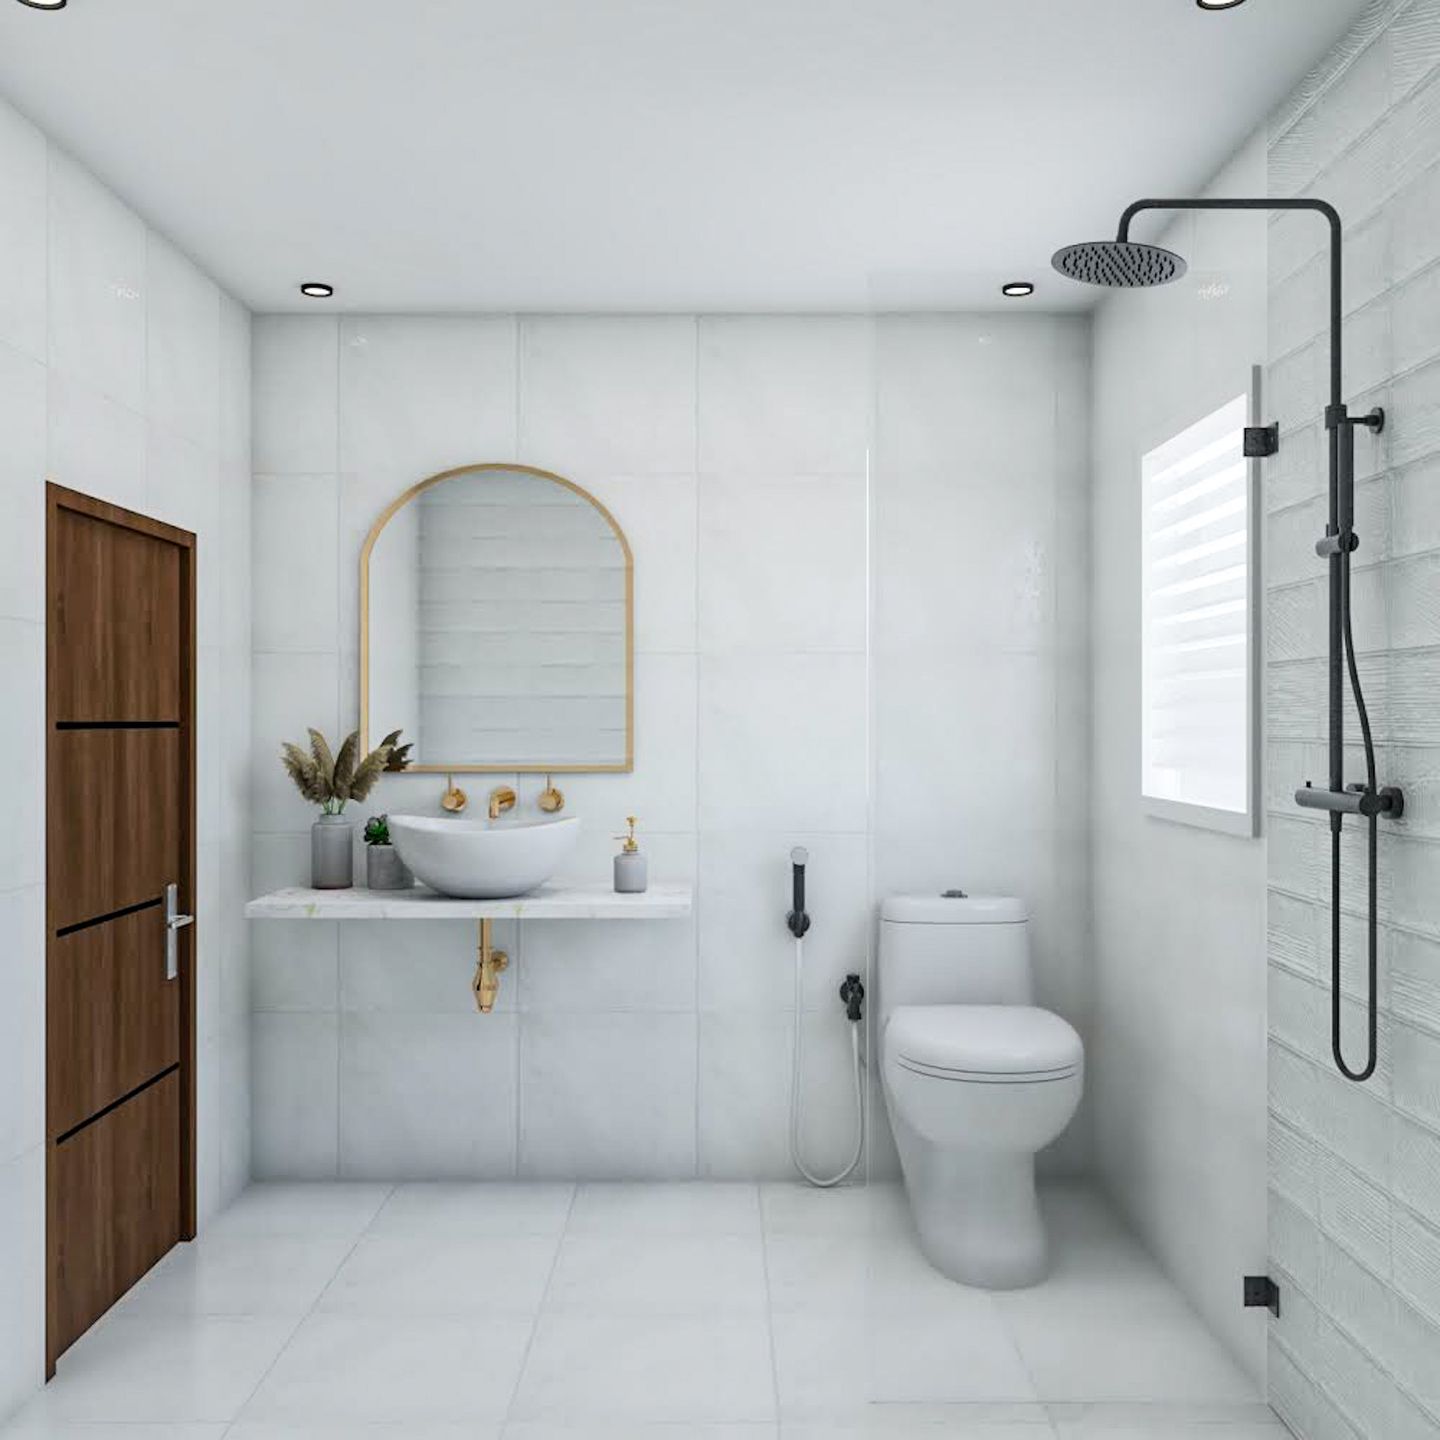 All-White Bathroom Design With Arched Mirror - Livspace